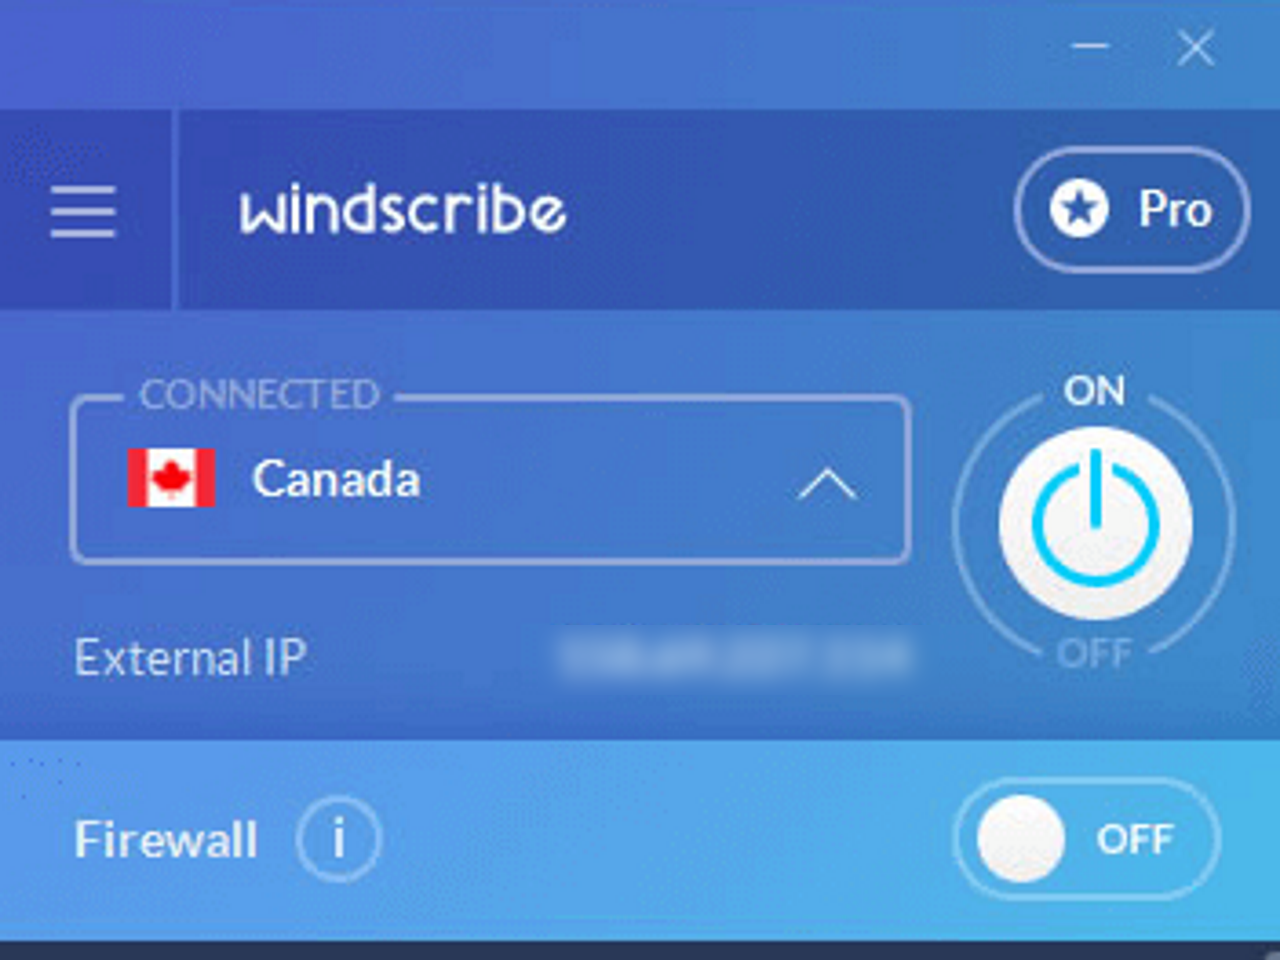 Windscribe’s delightfully simple interface with server drop-down menu